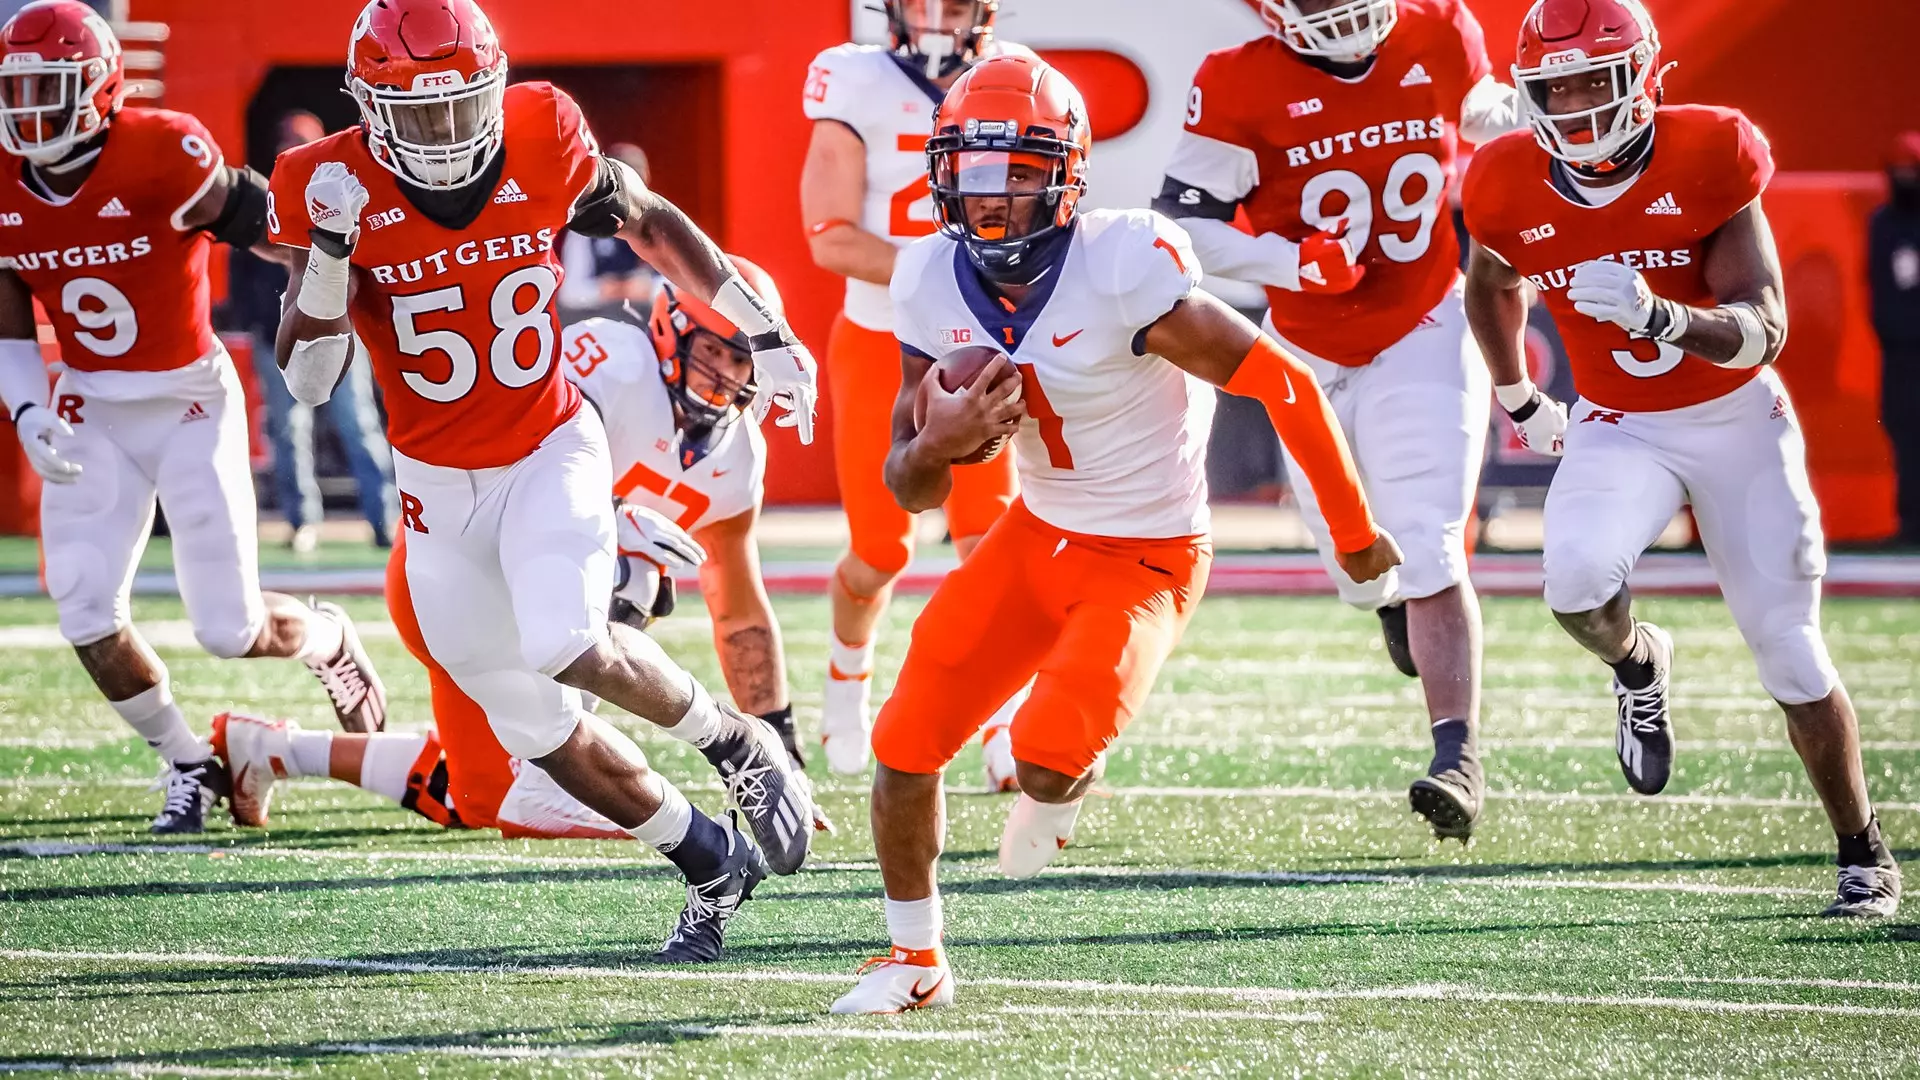 Isaiah Williams is a dynamic playmaker on offense for Illinois. He has exceptional speed and vision which help him gain a lo of YAC. Hula Bowl scout Ian McNice breaks down Williams as an NFL Prospect in his report.